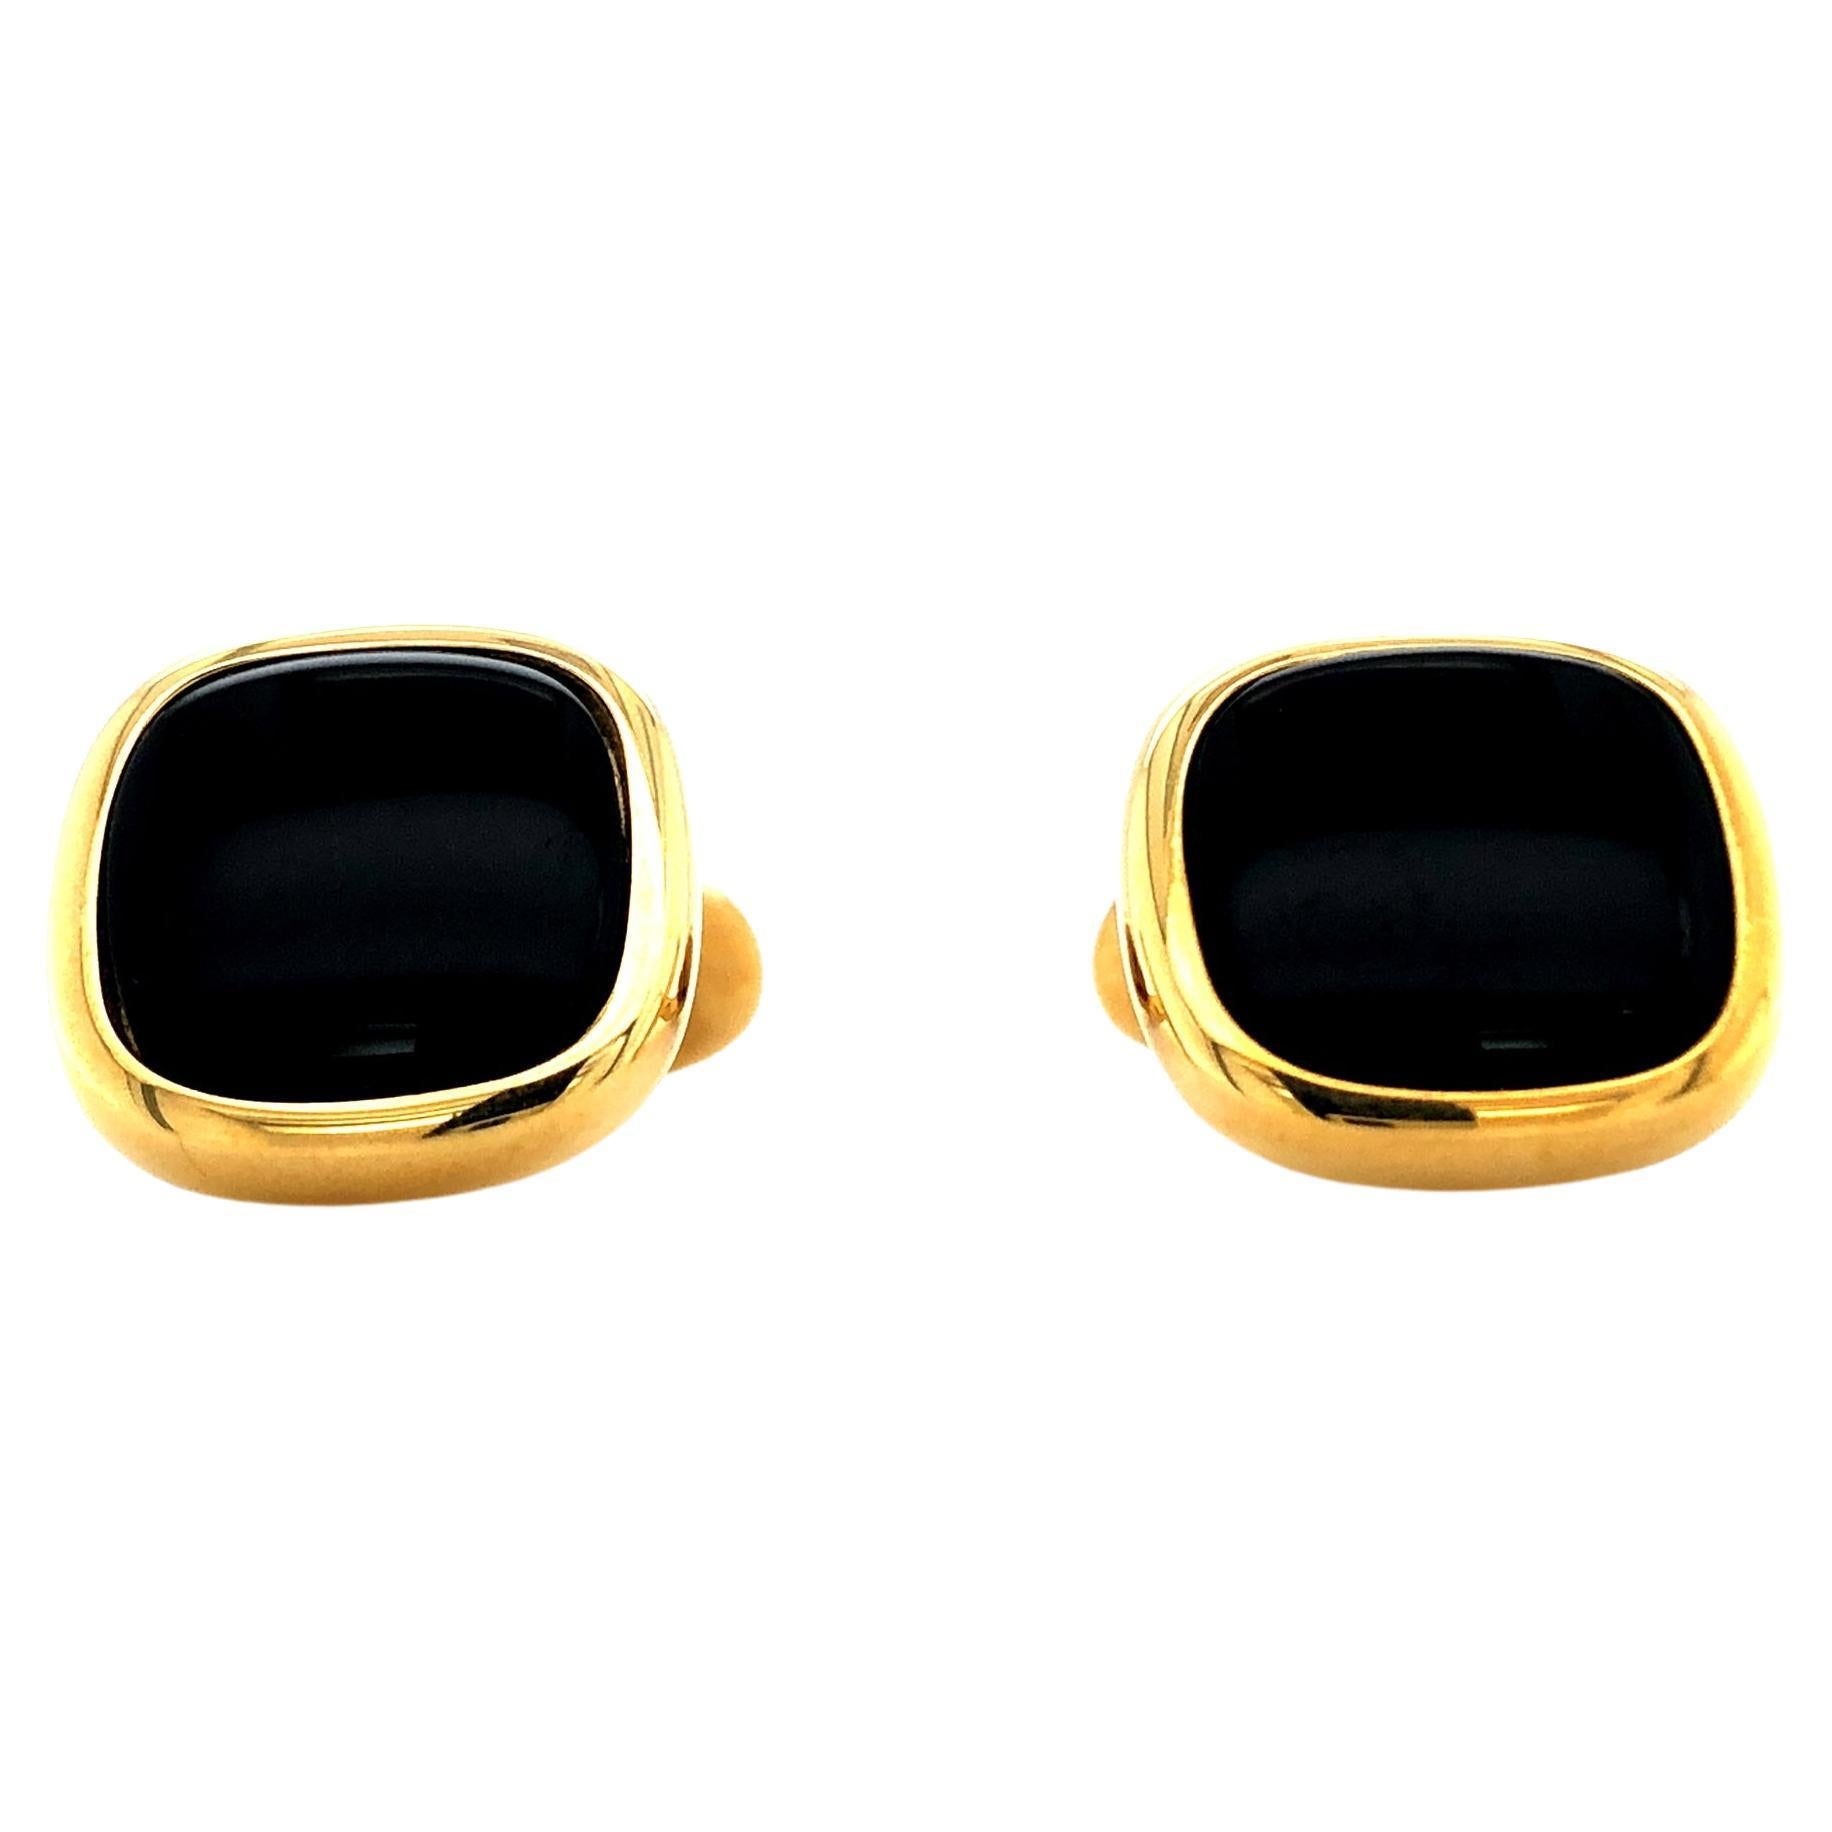 Square Cufflinks Rounded Contours, 18k Yellow Gold